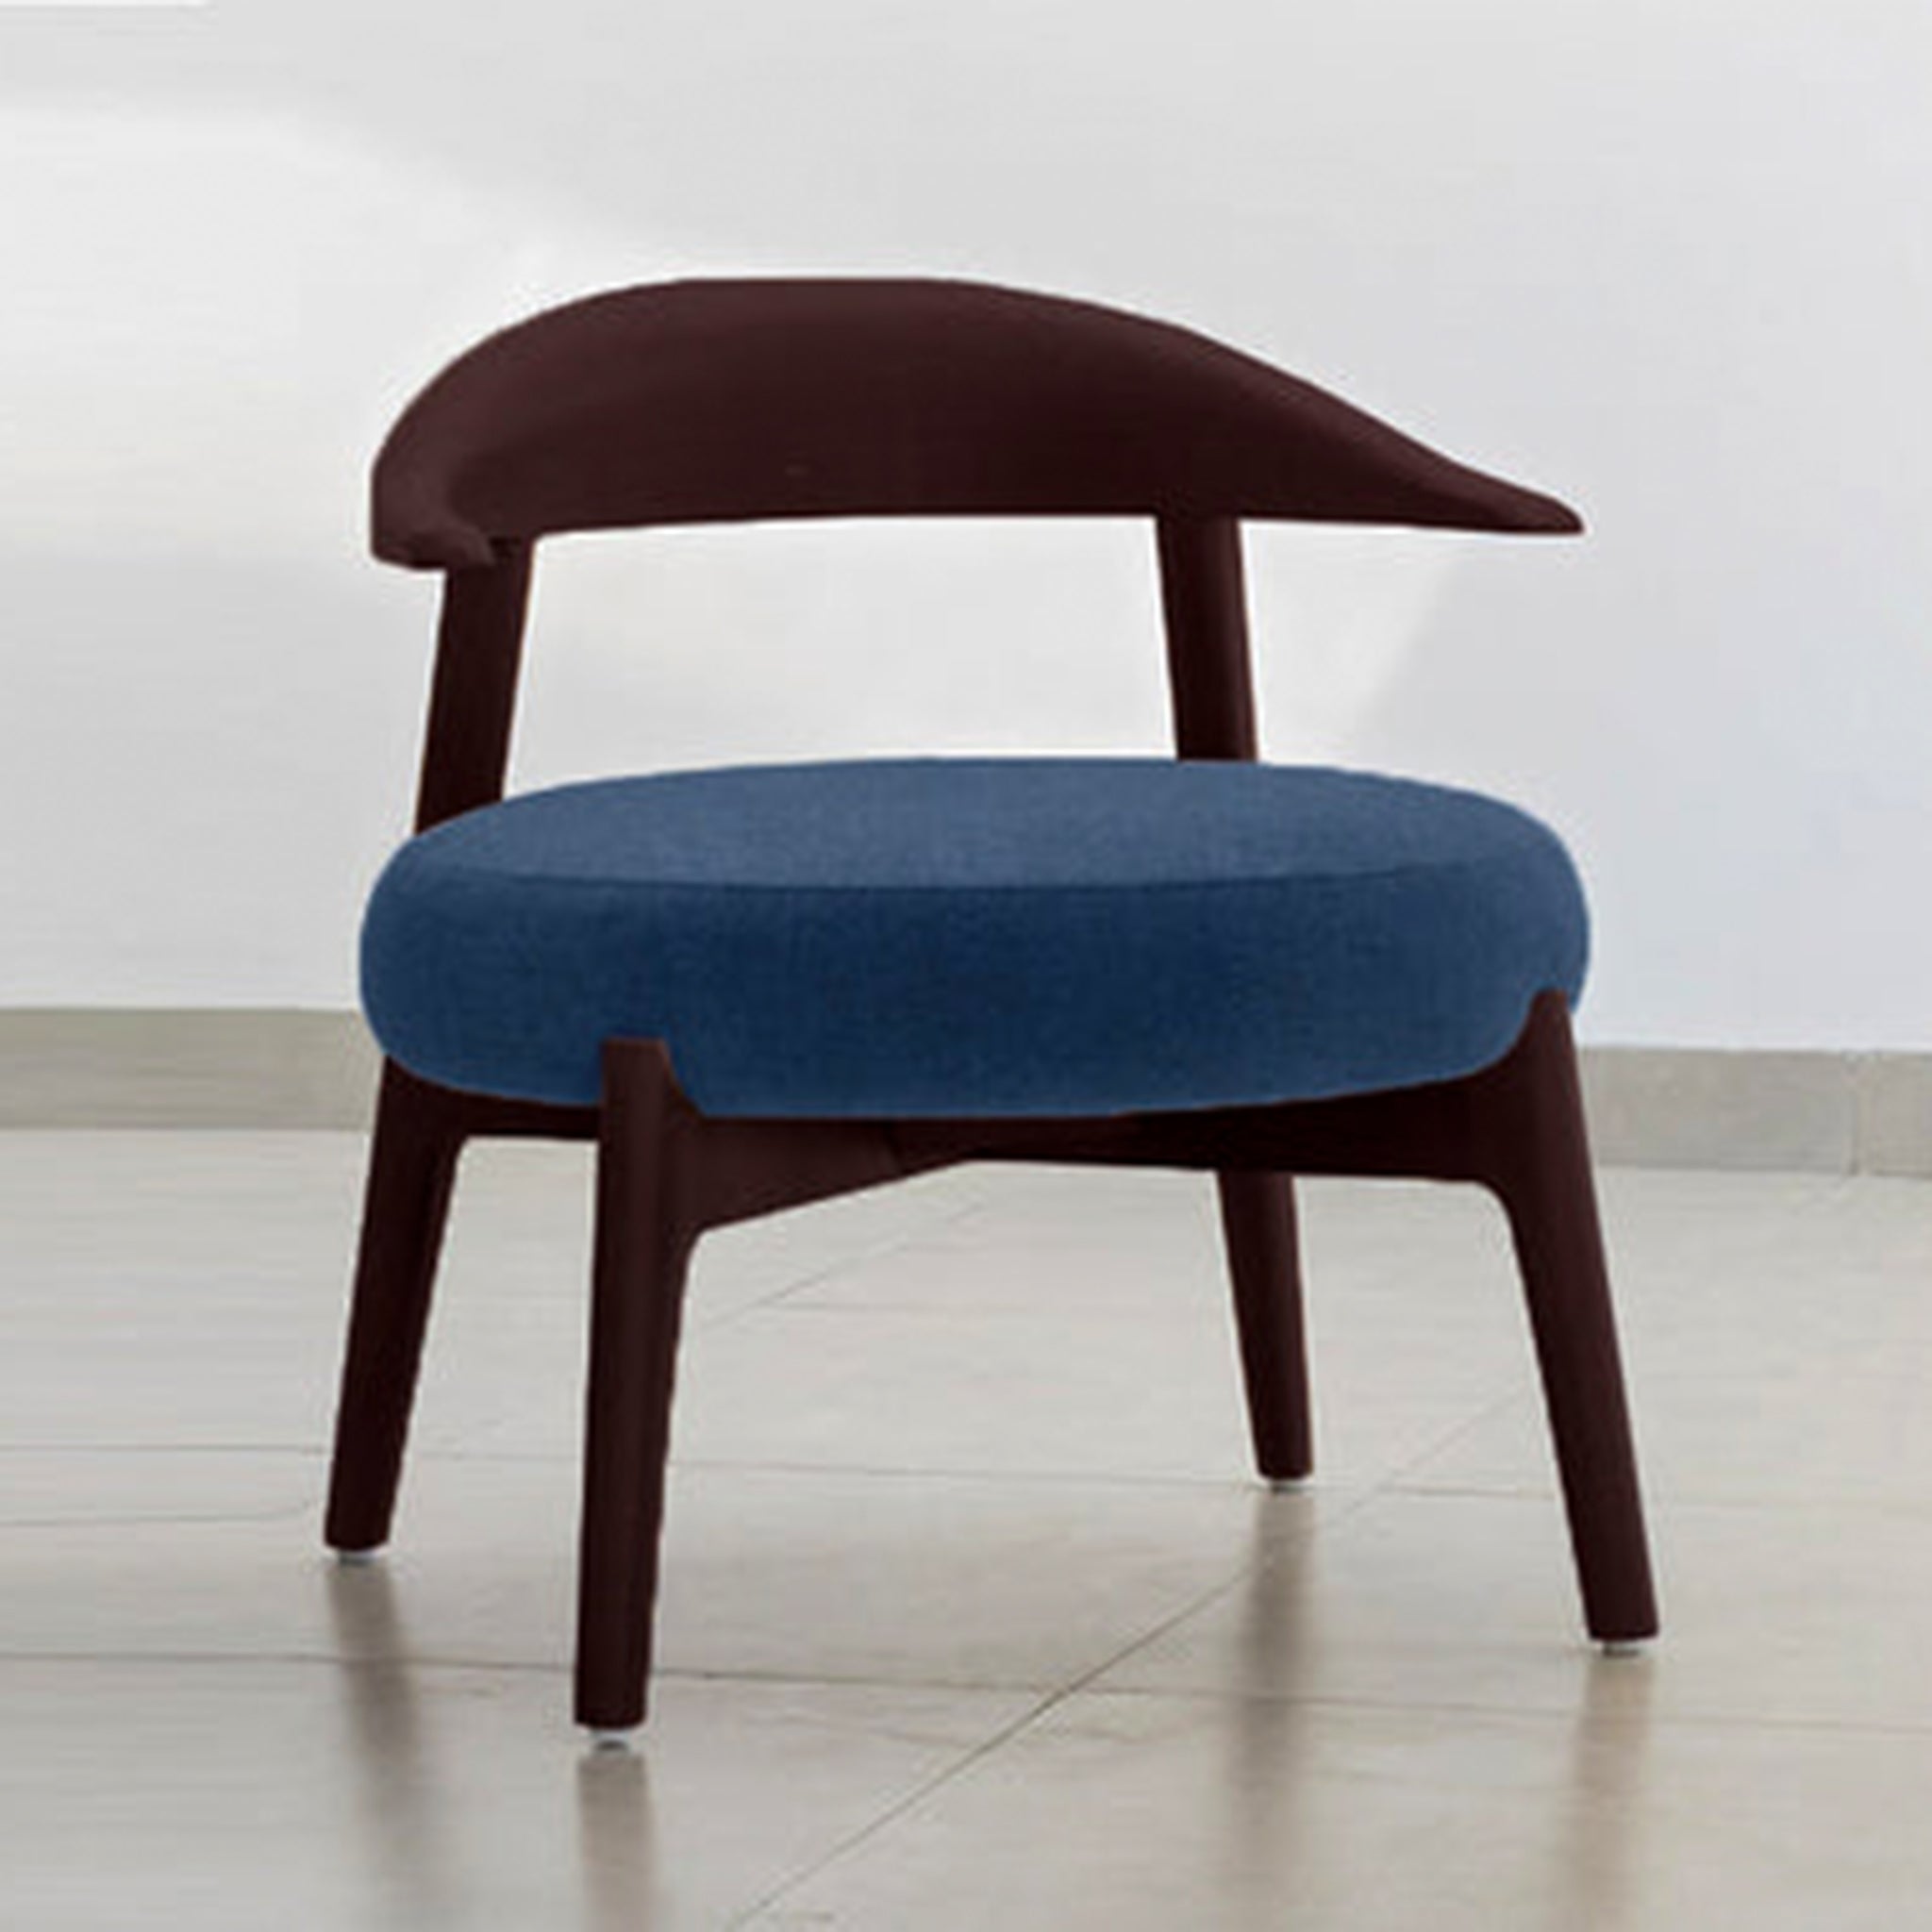 "The Hyde Accent Chair's ergonomic wooden design"